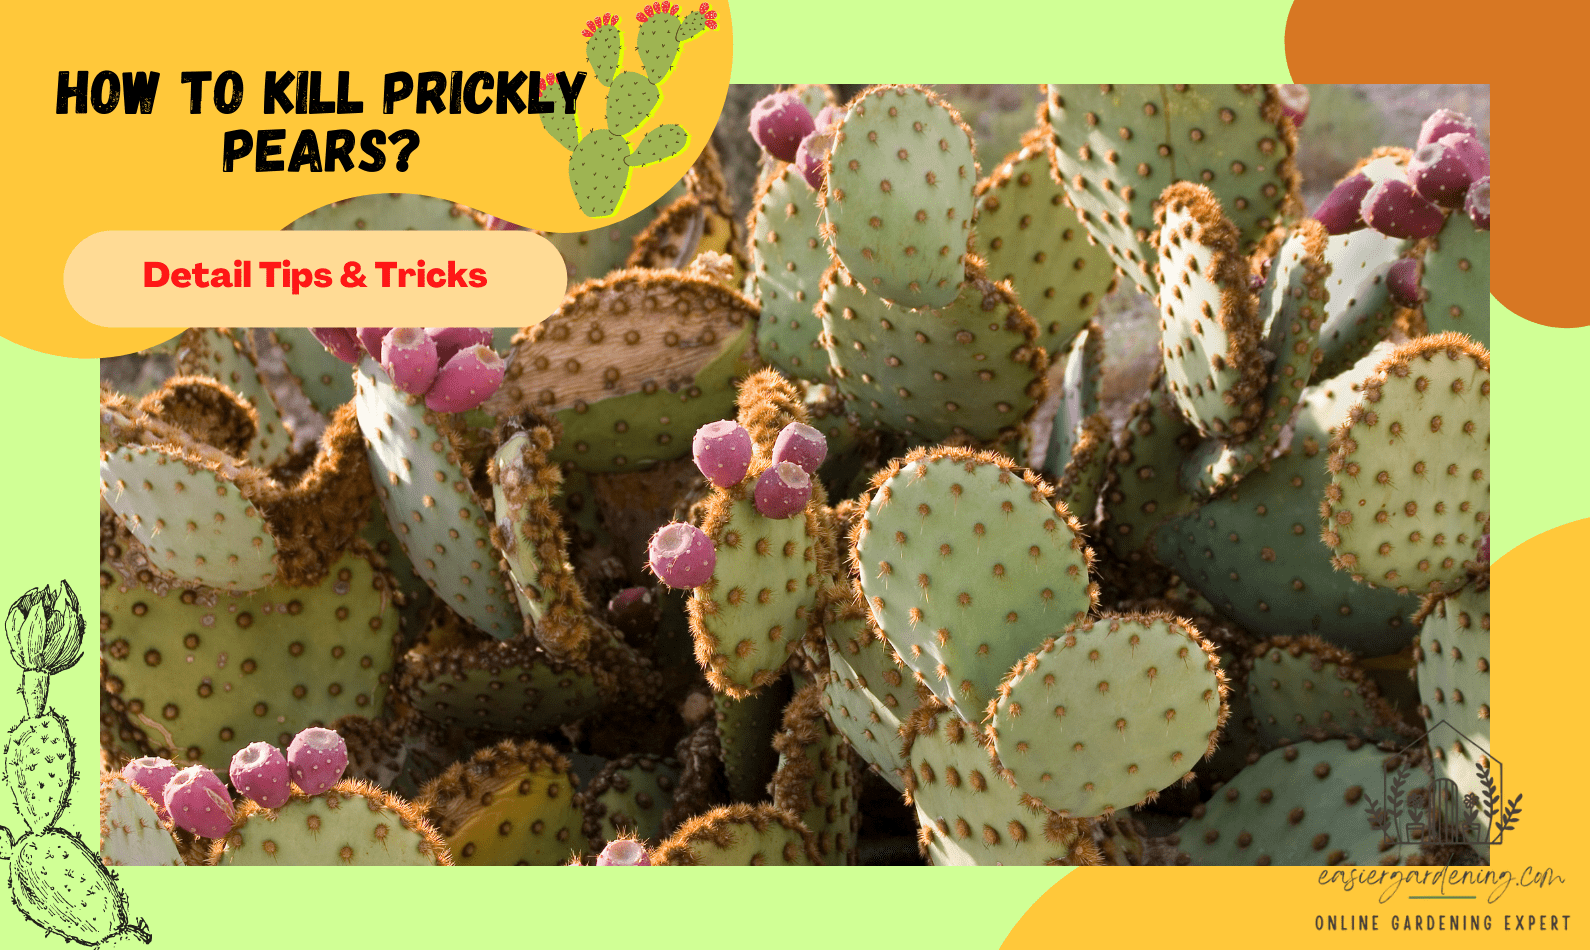 How to Kill Prickly Pears?